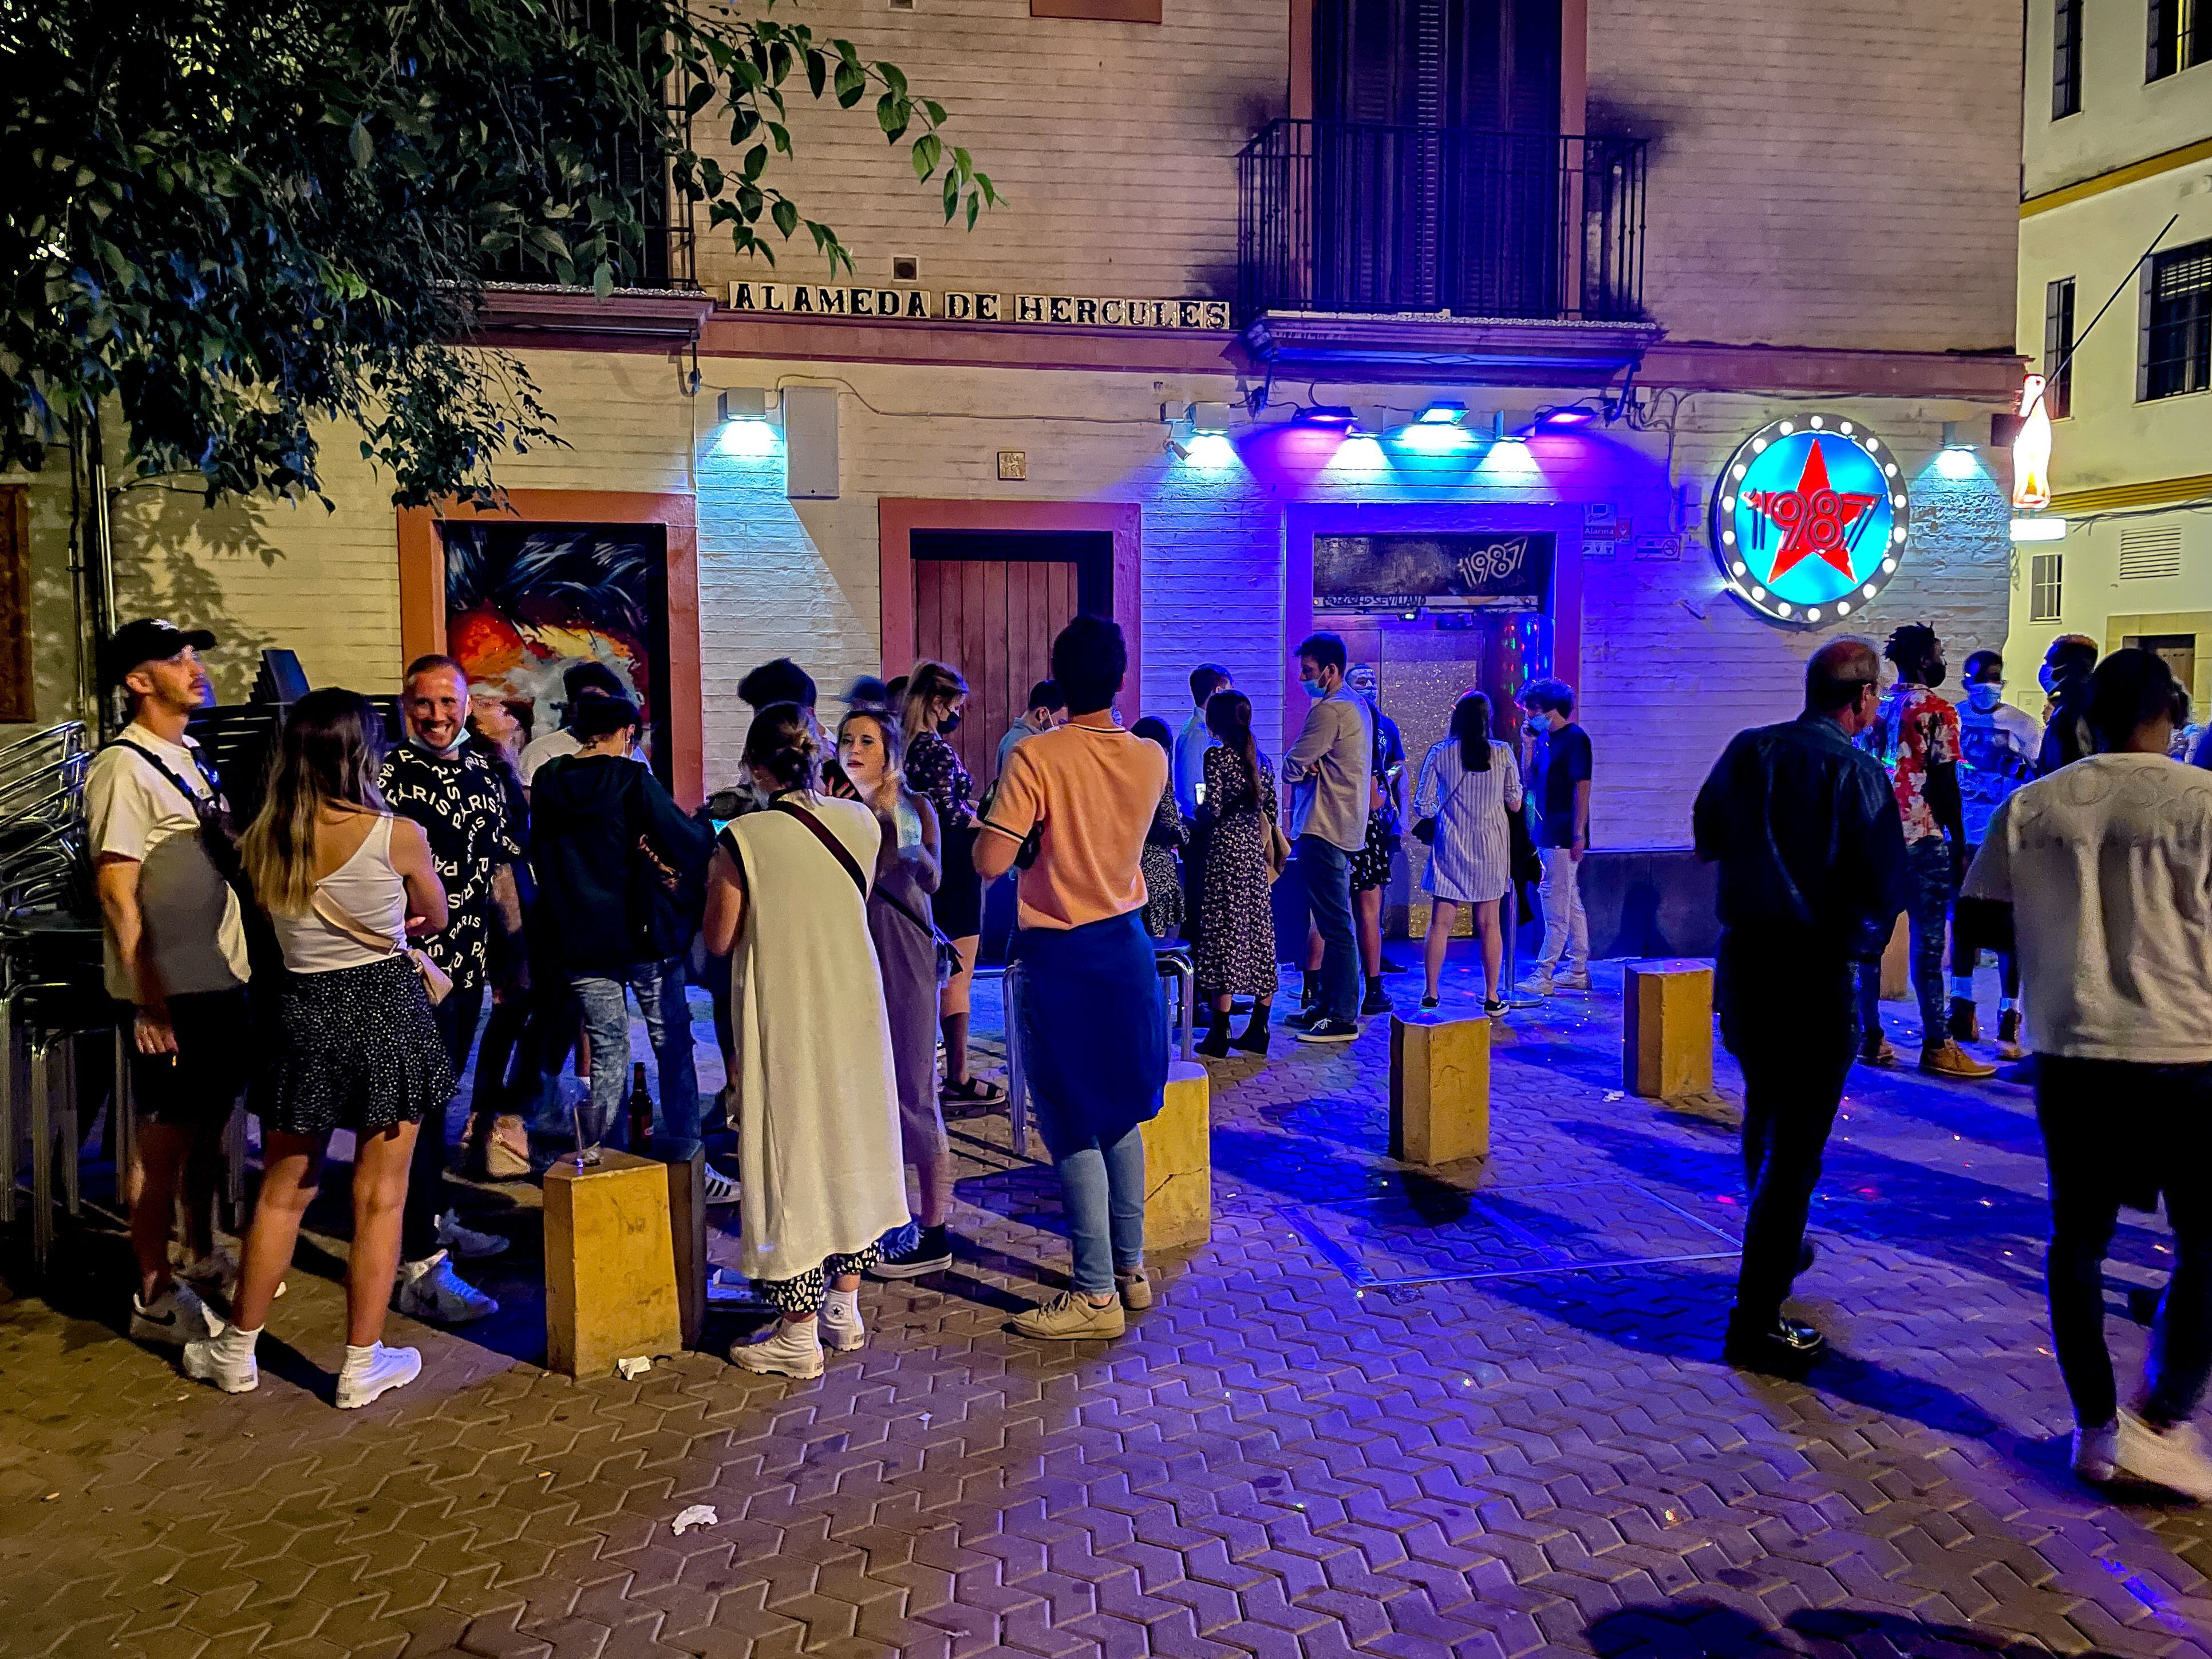 A line of people waiting outside a nightclub in Seville.